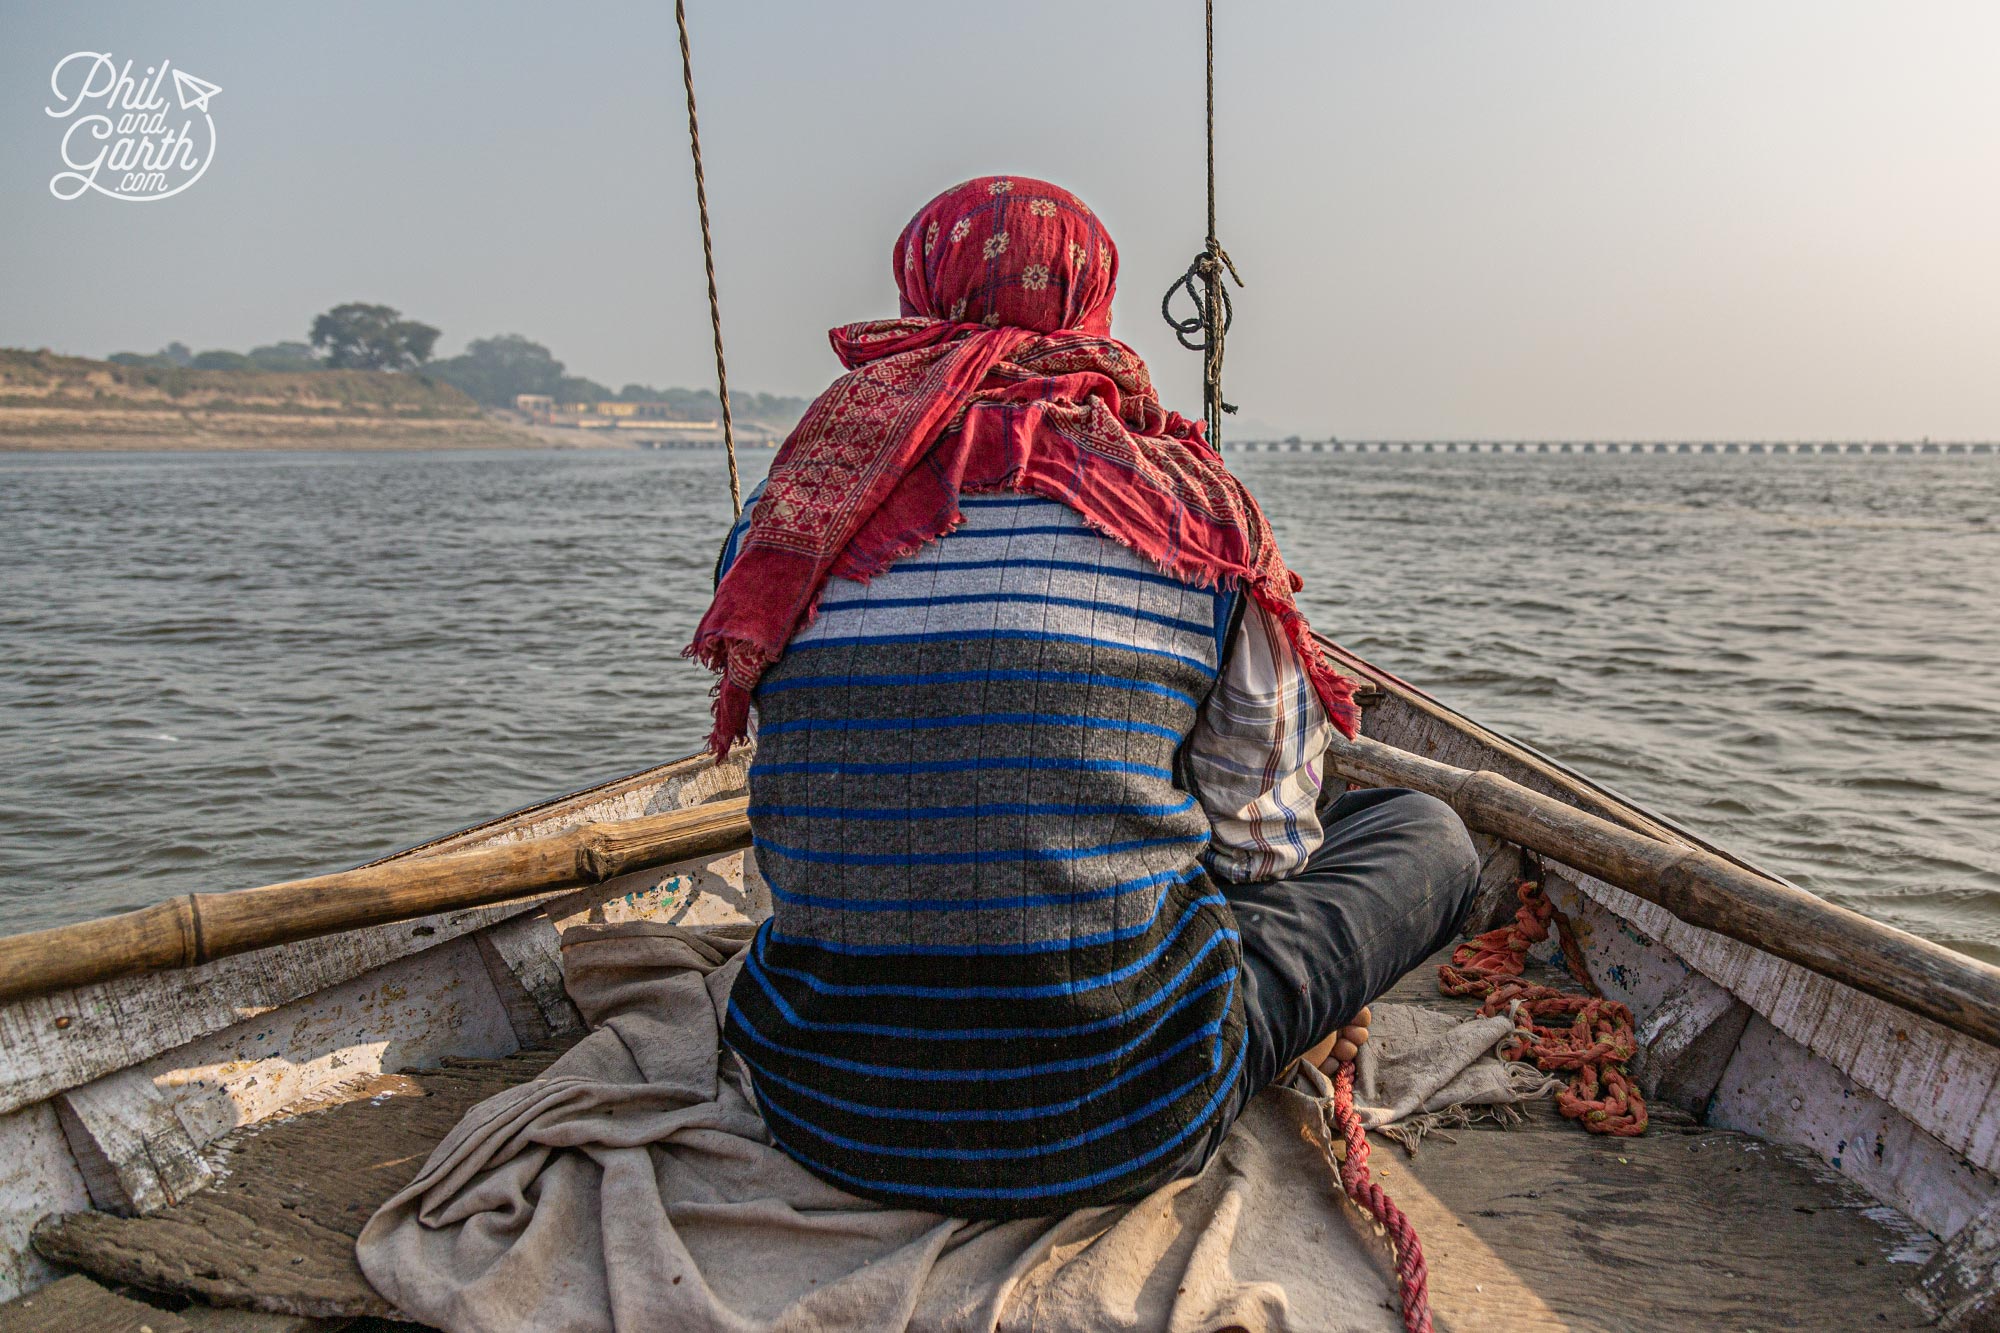 What an unforgettable trip along the River Ganges